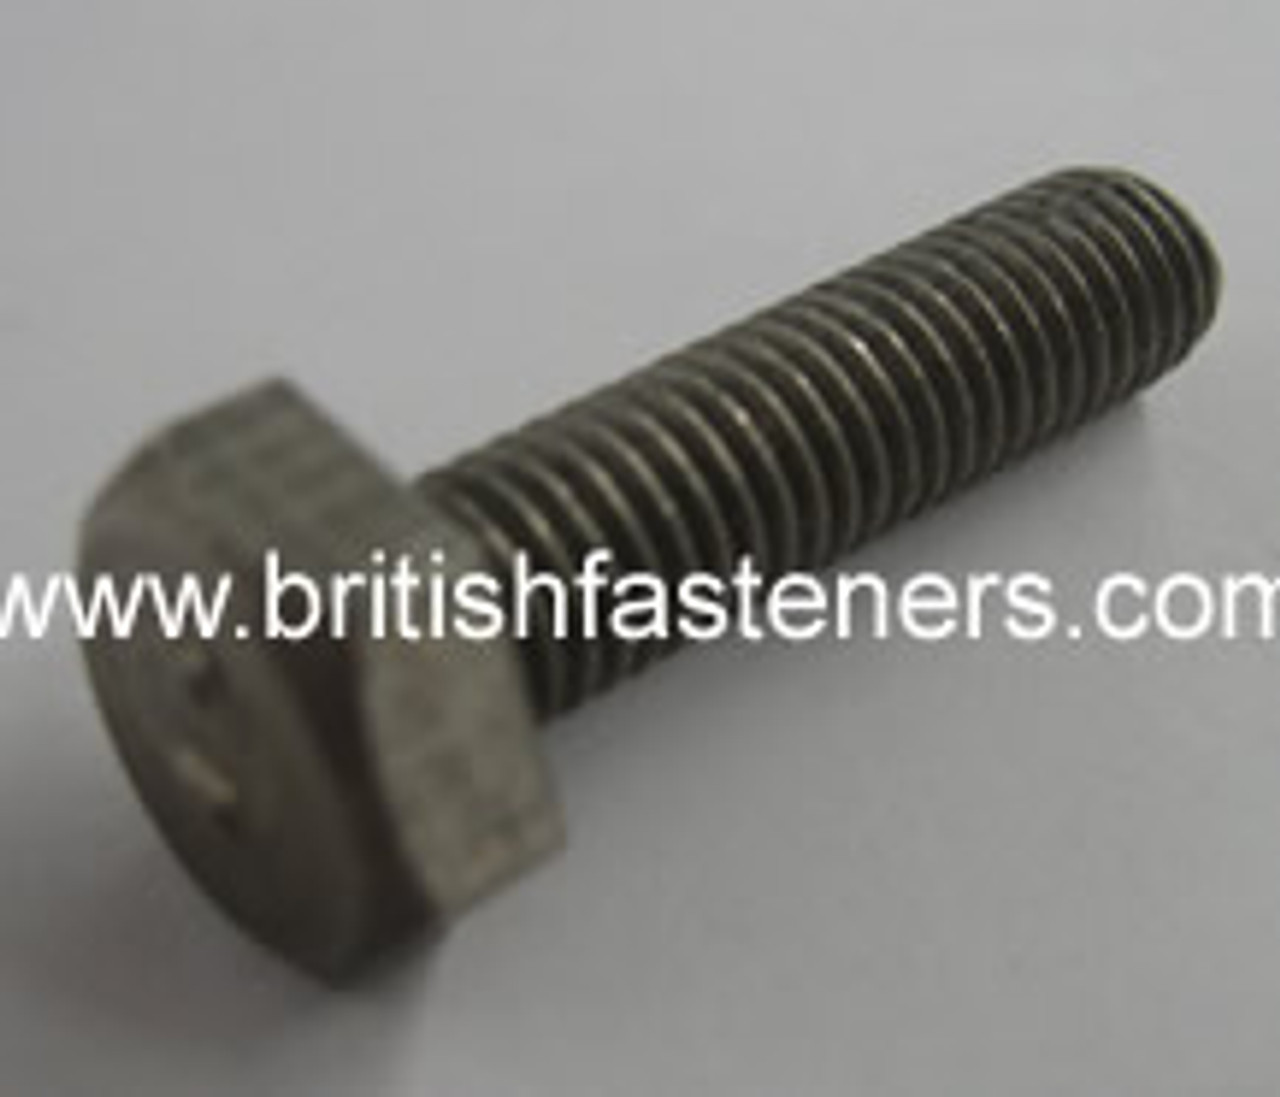 Stainless Screw BSF/BSC Hex 1/4 x 1/2" - (6315)